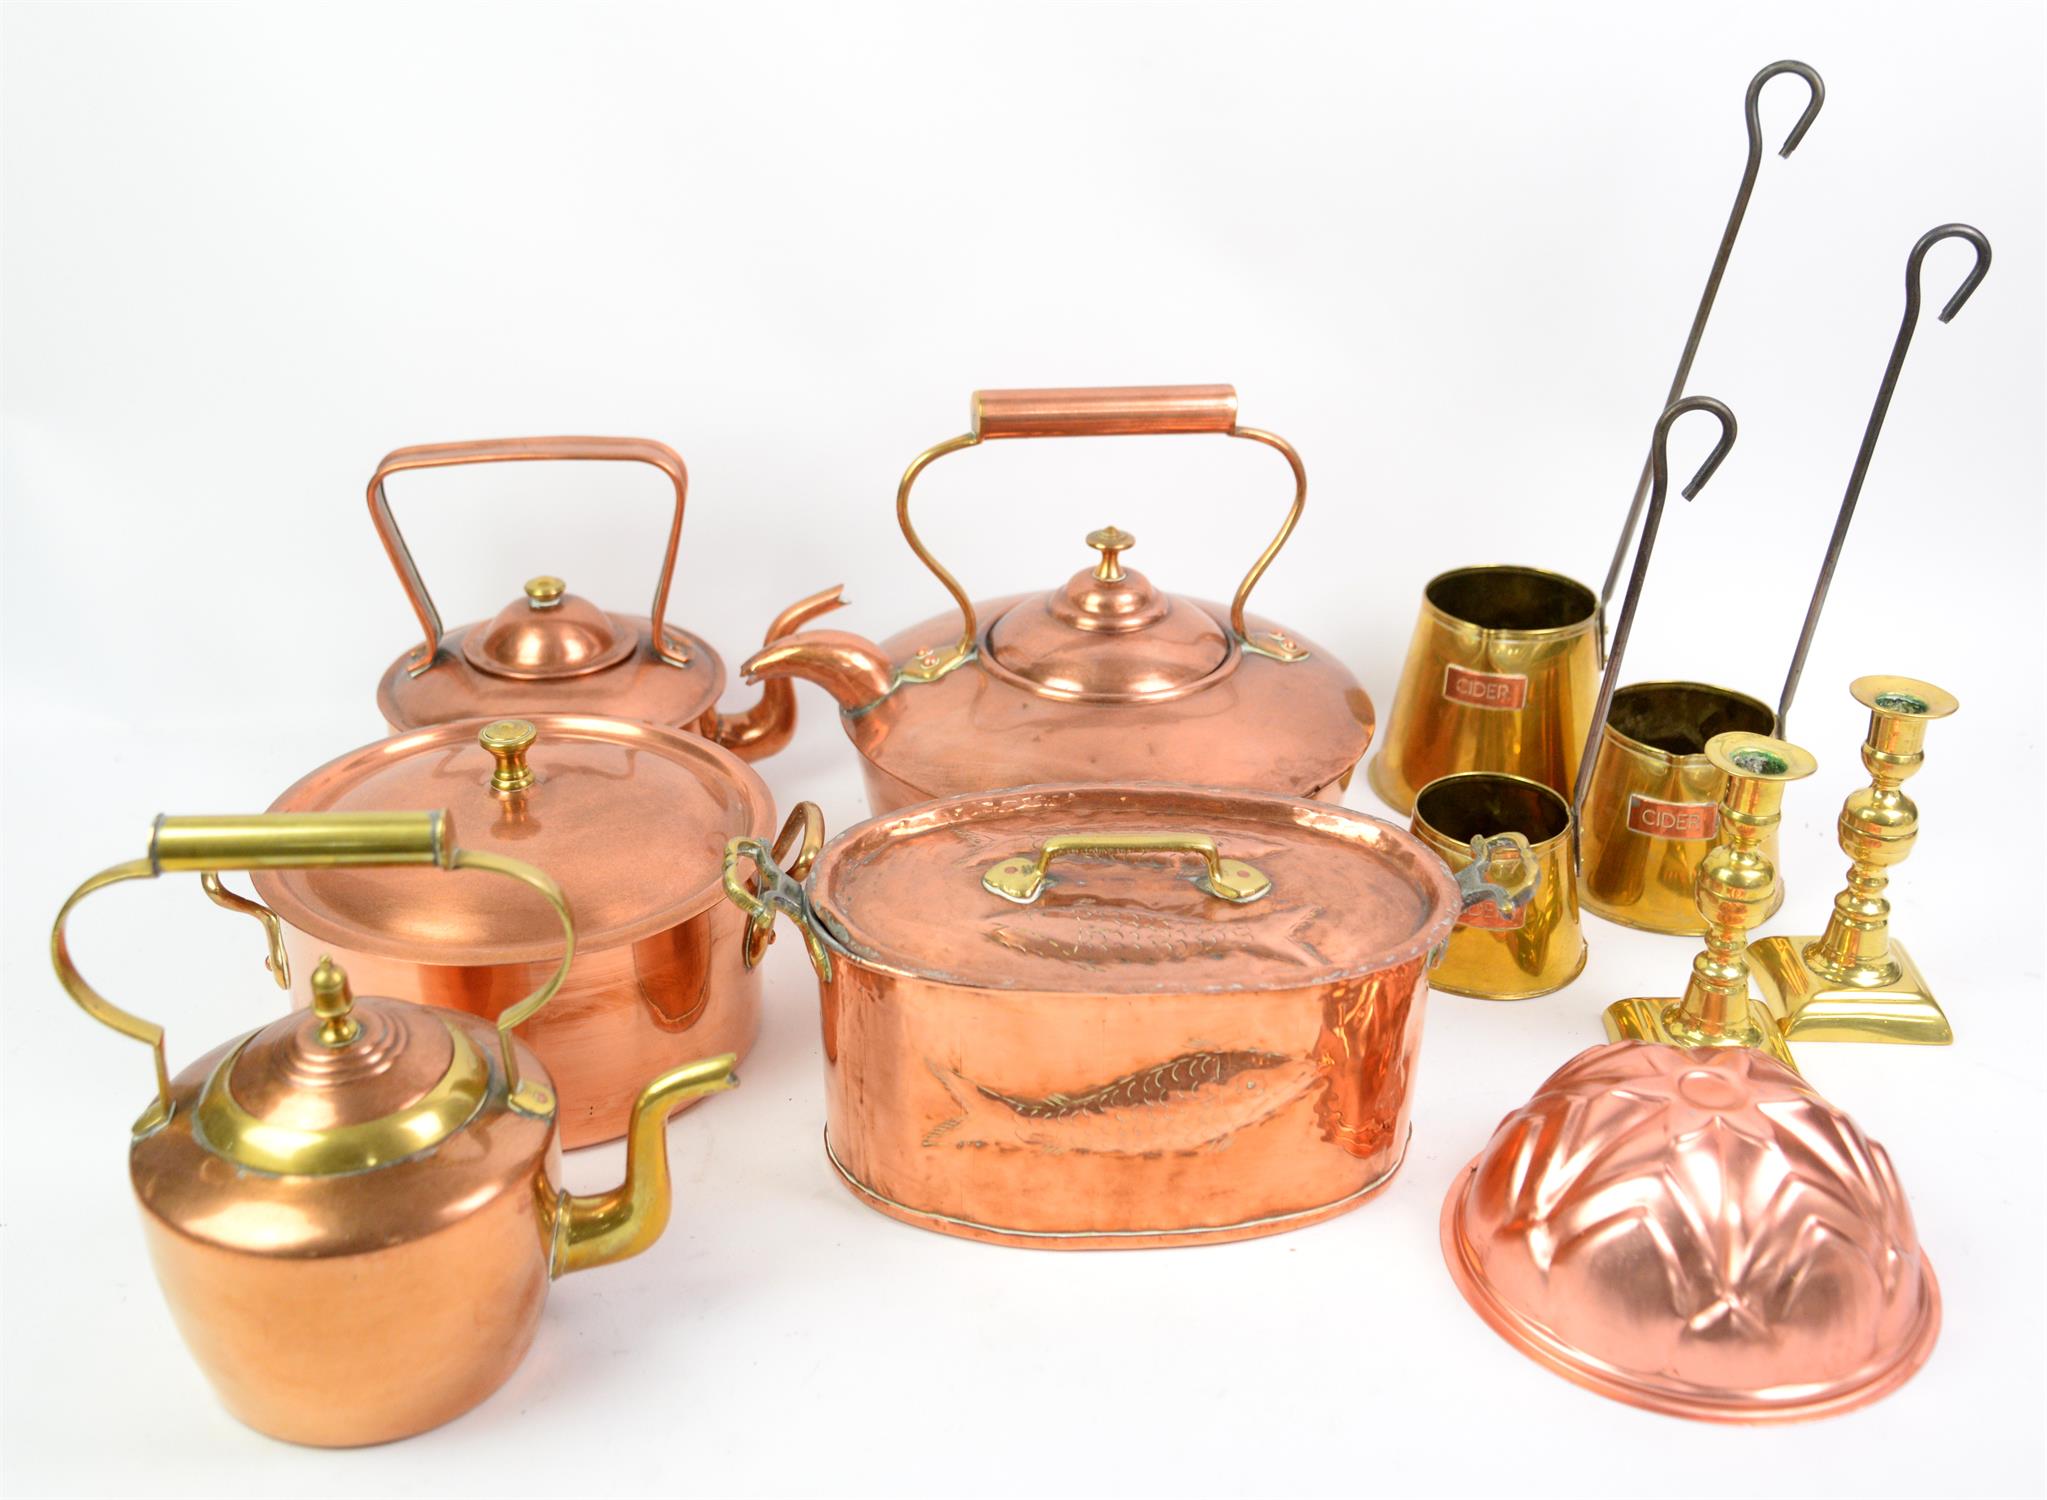 Brass and copperware, items include kettles, pans, candlesticks and bowls.